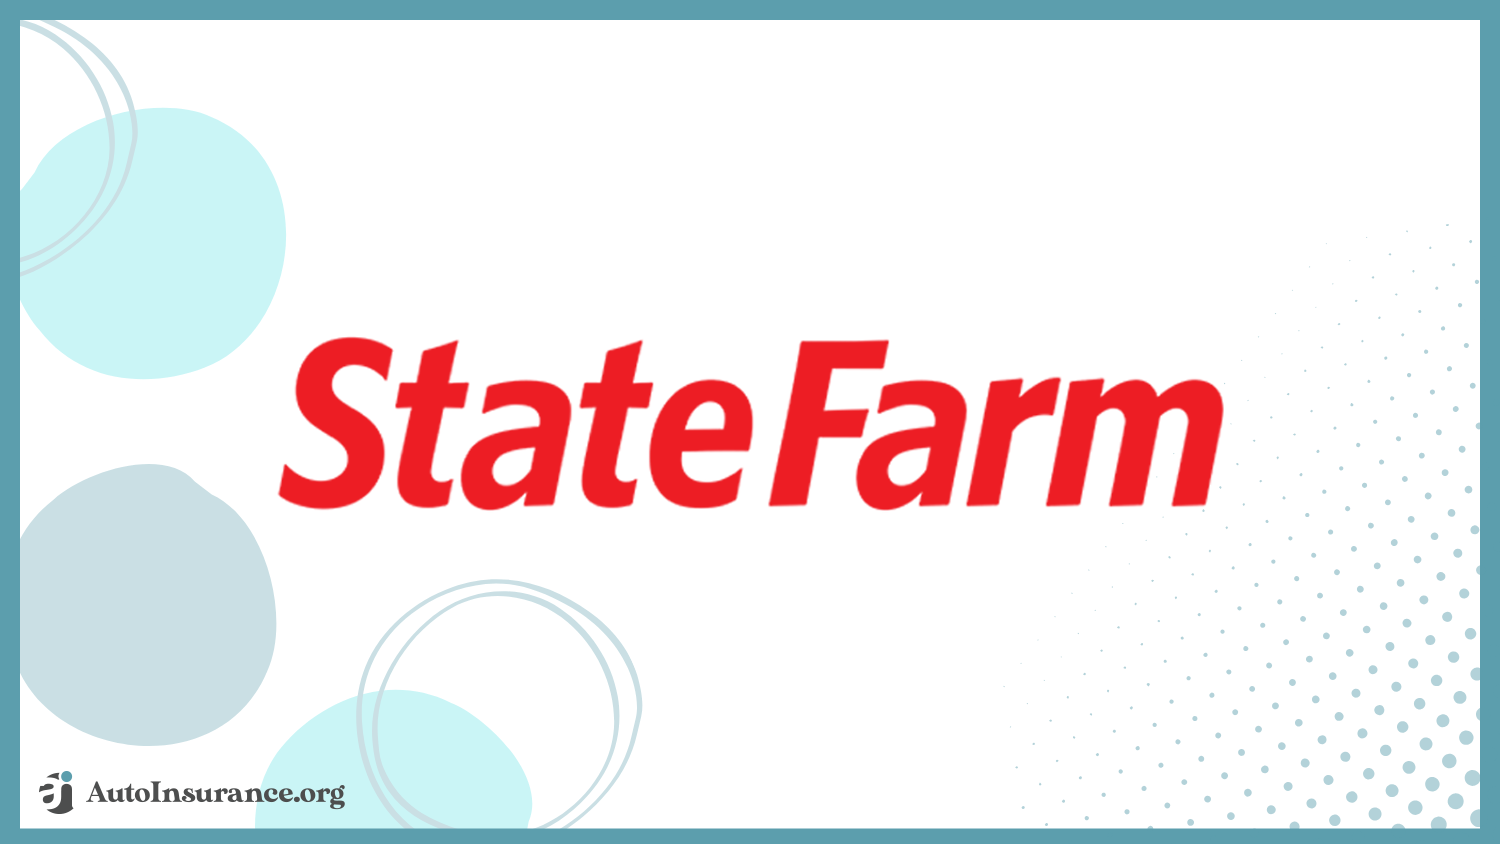 State Farm: Best Auto Insurance for State Employees